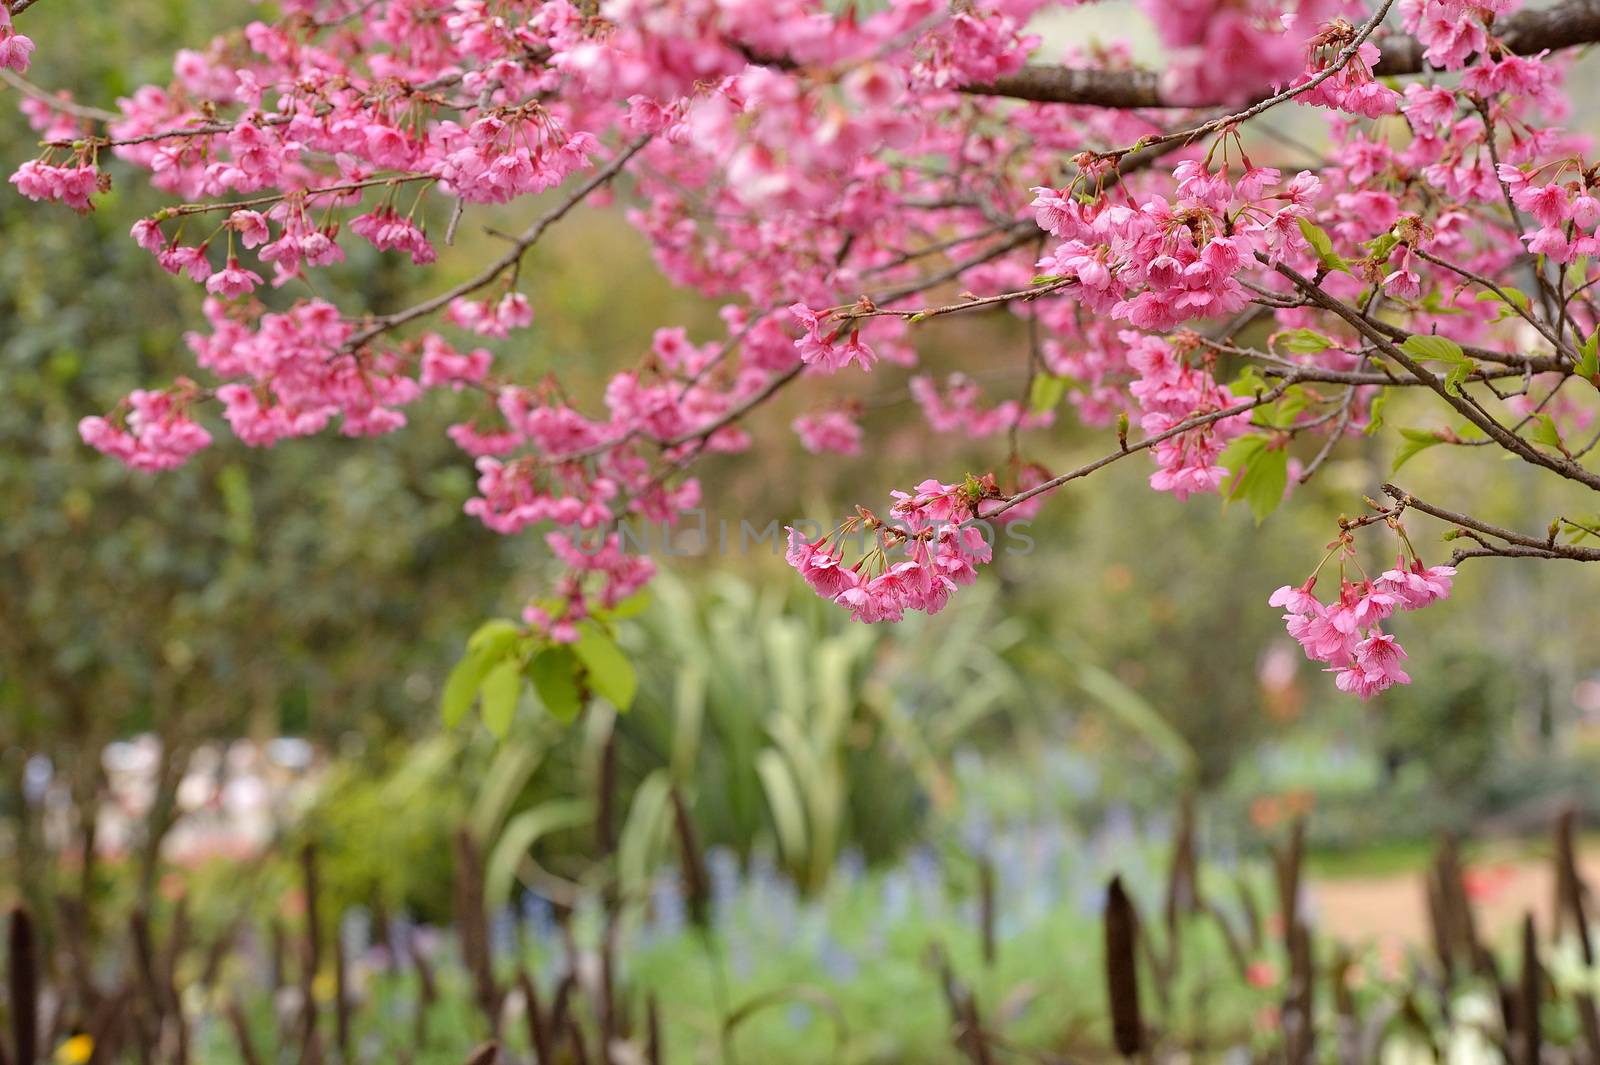 Himalayan Cherry (Prunus cerasoides) blooming at Doi Angkhang, T by think4photop